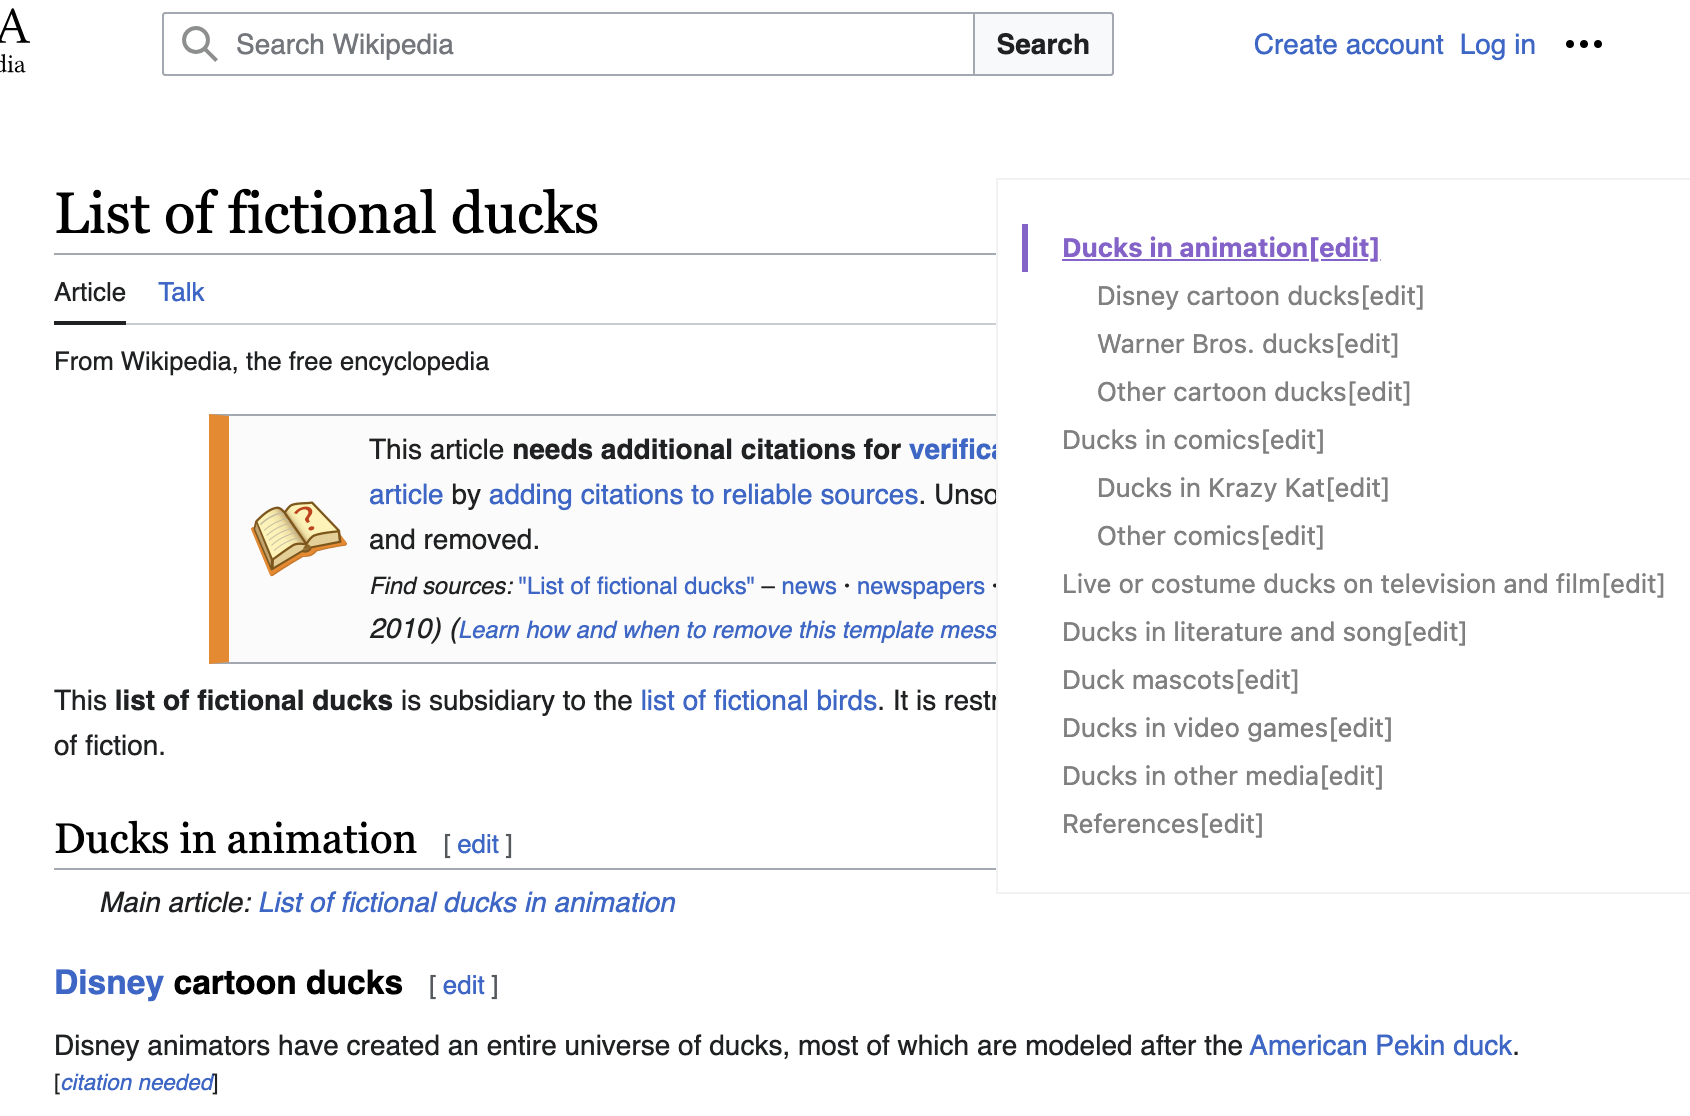 The Wikipedia page for the list of fictional ducks, showing a table of contents created by the Simple Outliner browser extension.